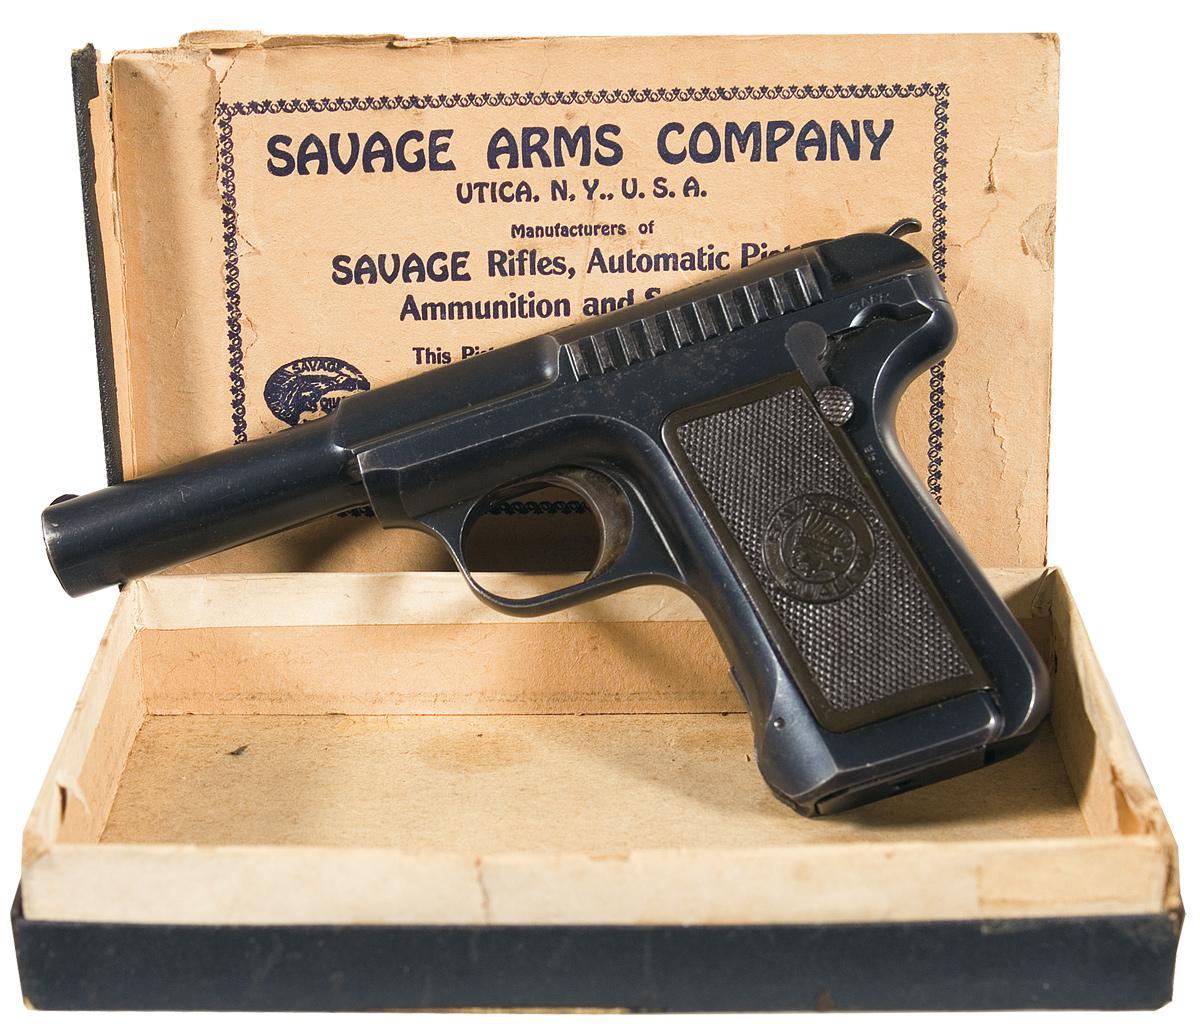 Savage Rifle Indian Logo - Outstanding Savage Arms Corporation Model 1917 Semi-Automatic ...